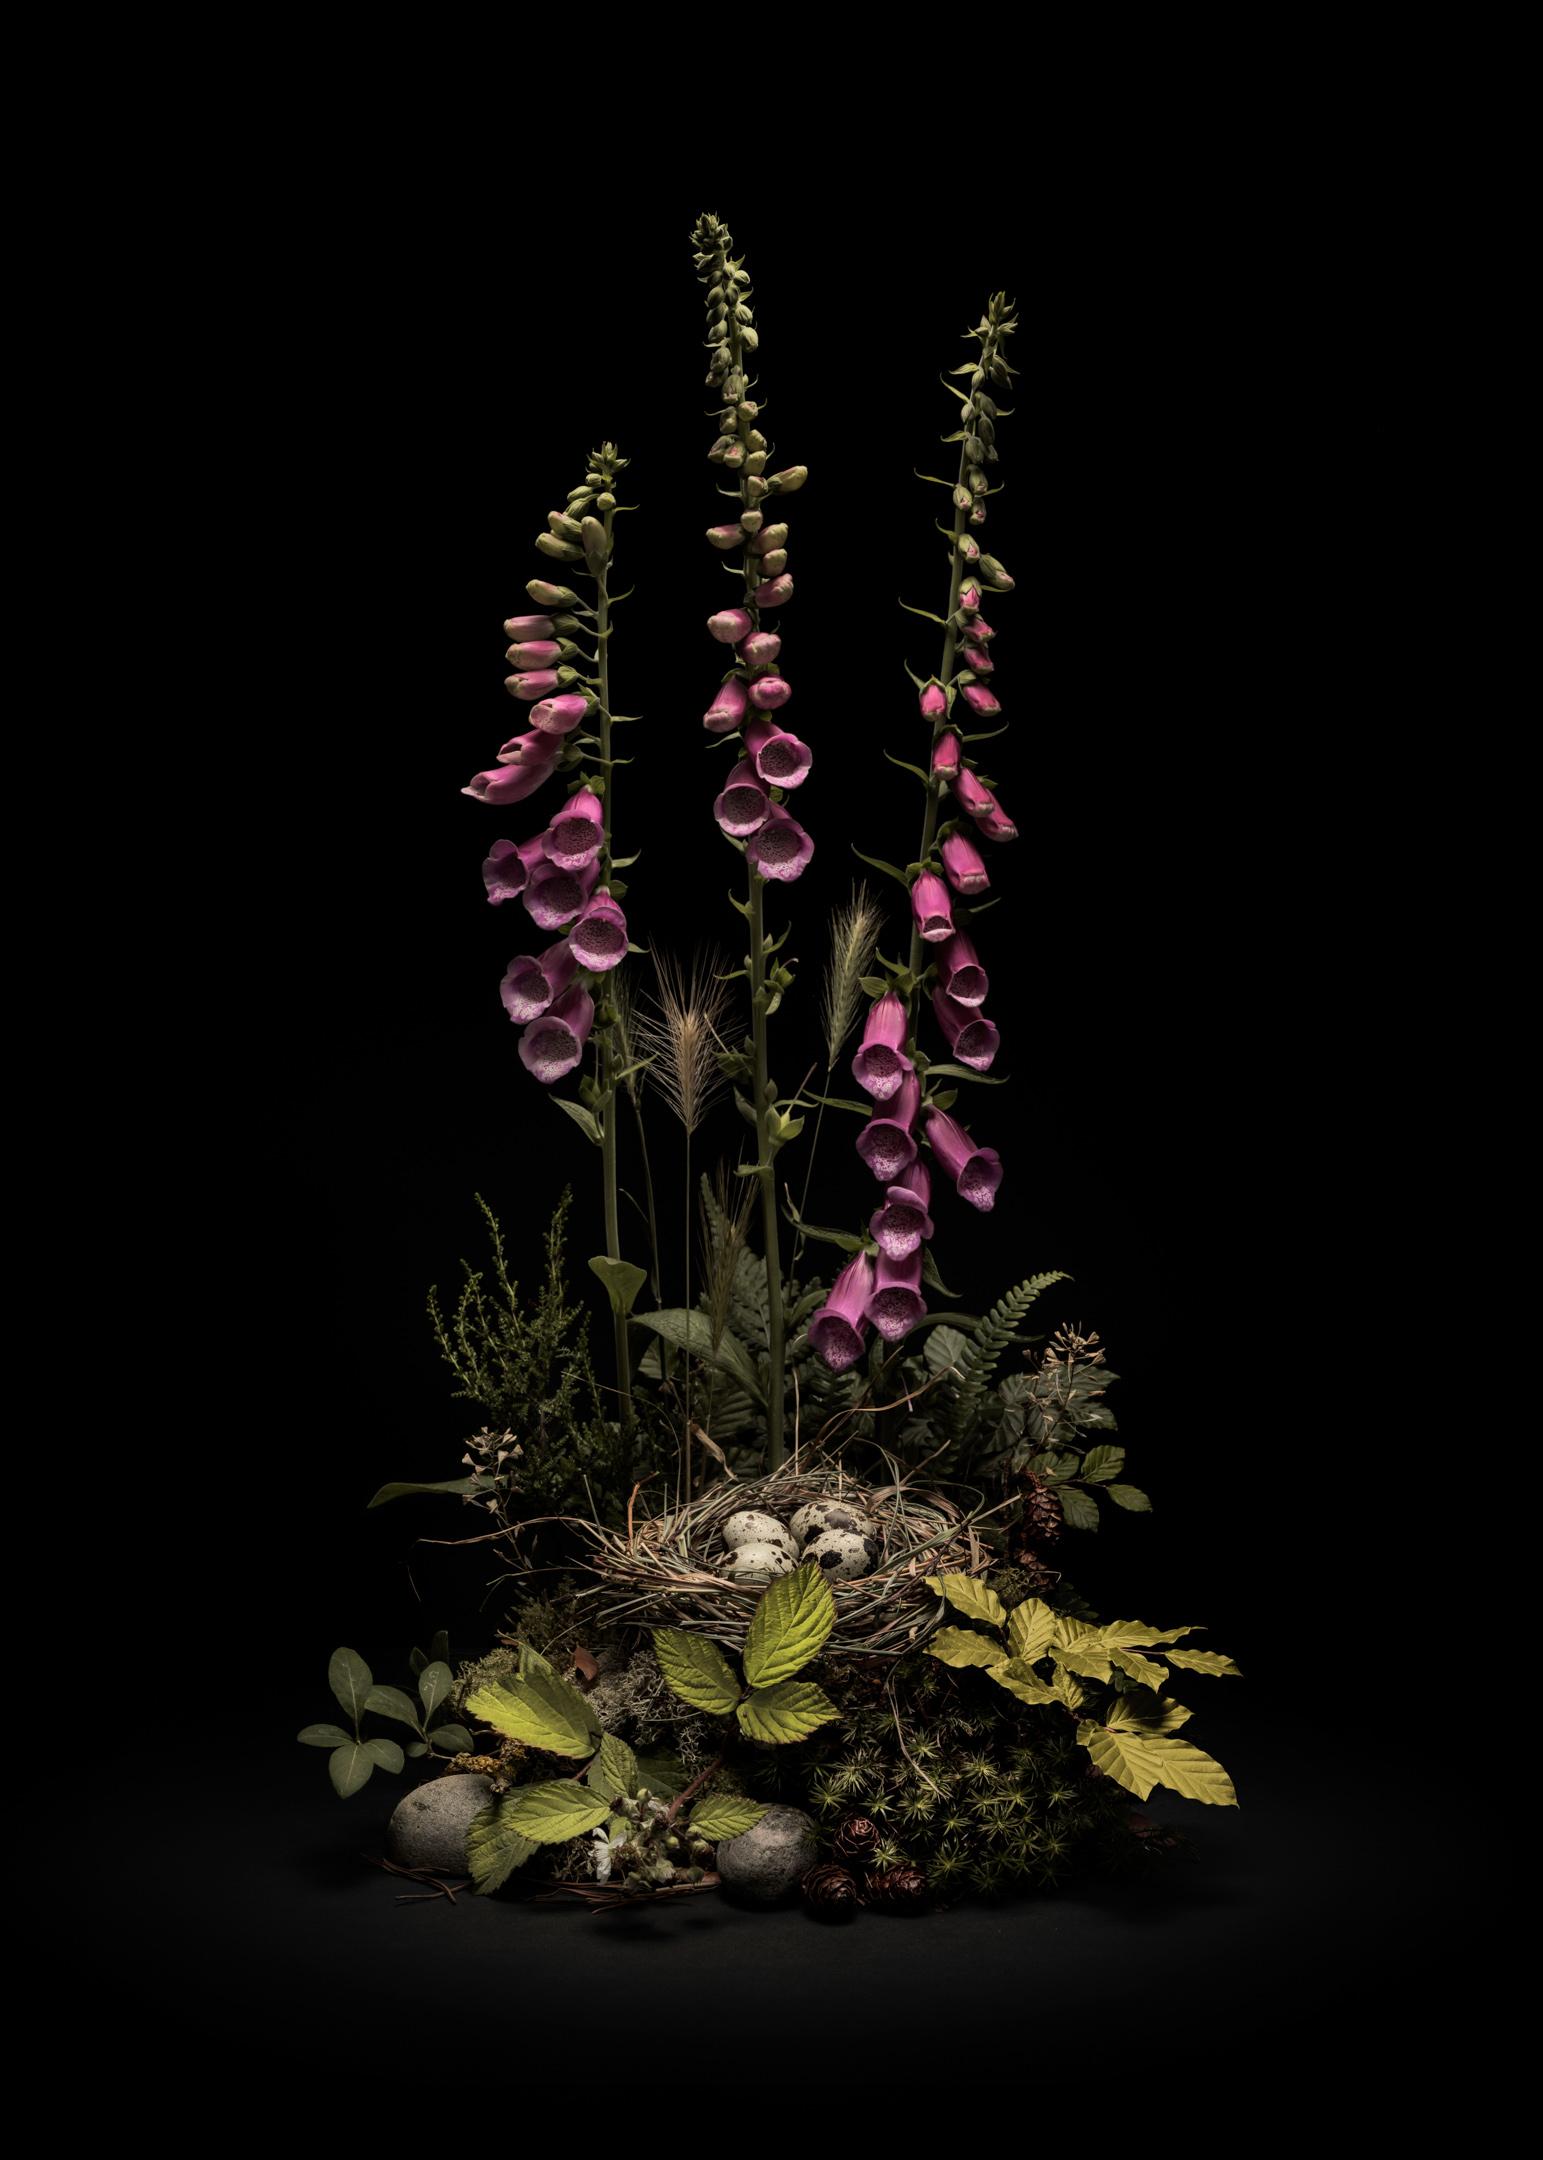 Jasper Goodall Color Photograph - Dar Flora #5, May Foxgloves, A floral arrangement of wild flowers and plants